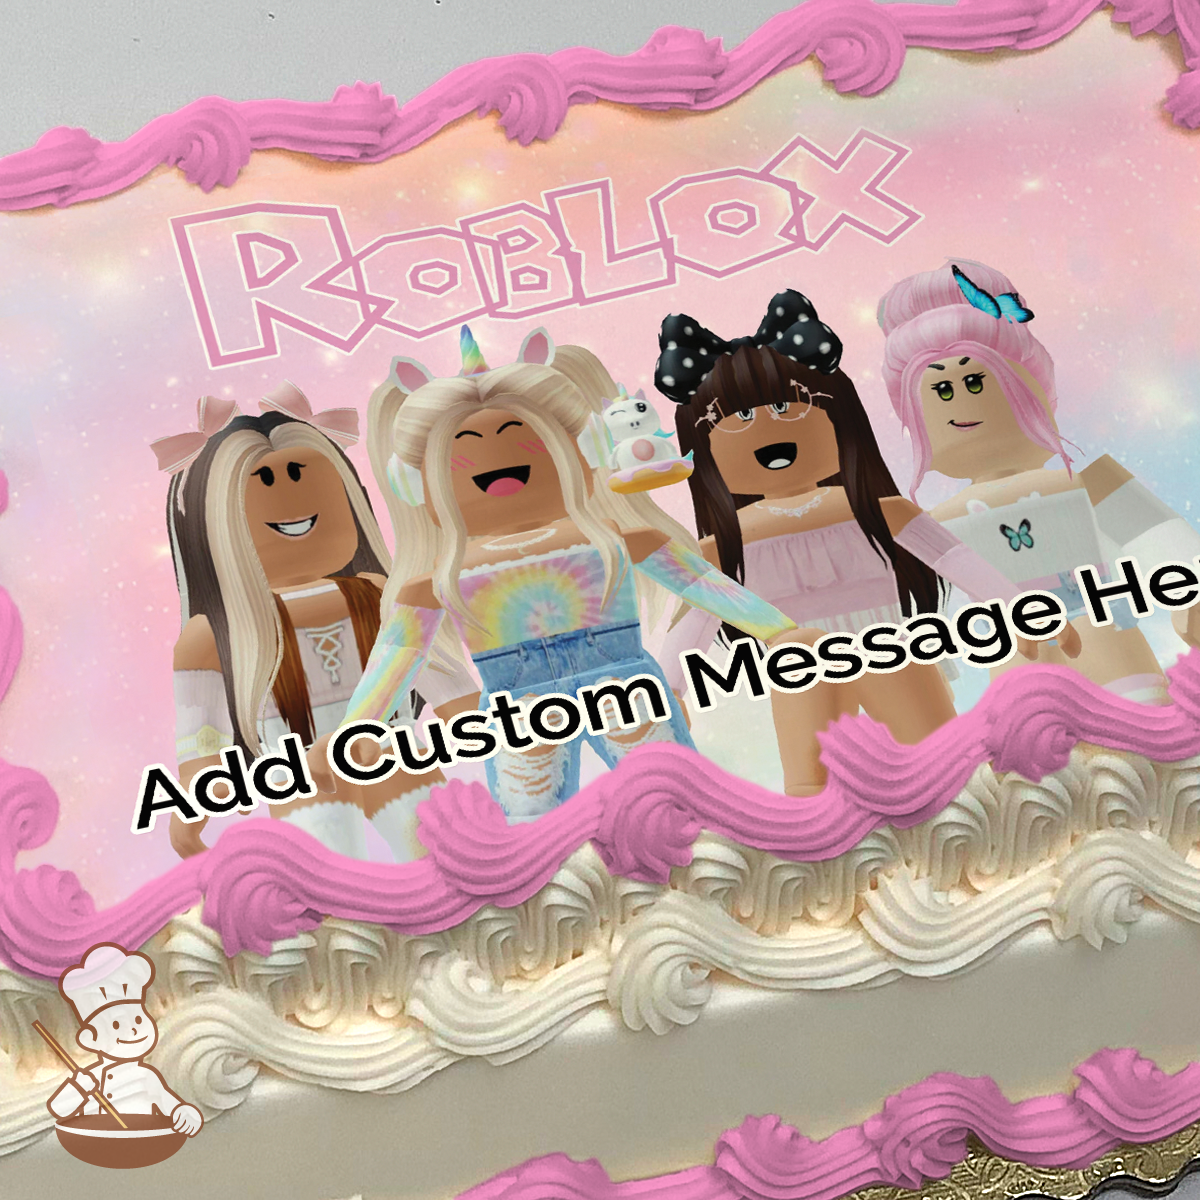 Girls of Roblox printed on extra cake layer and decorated on rectangle sheet cake.